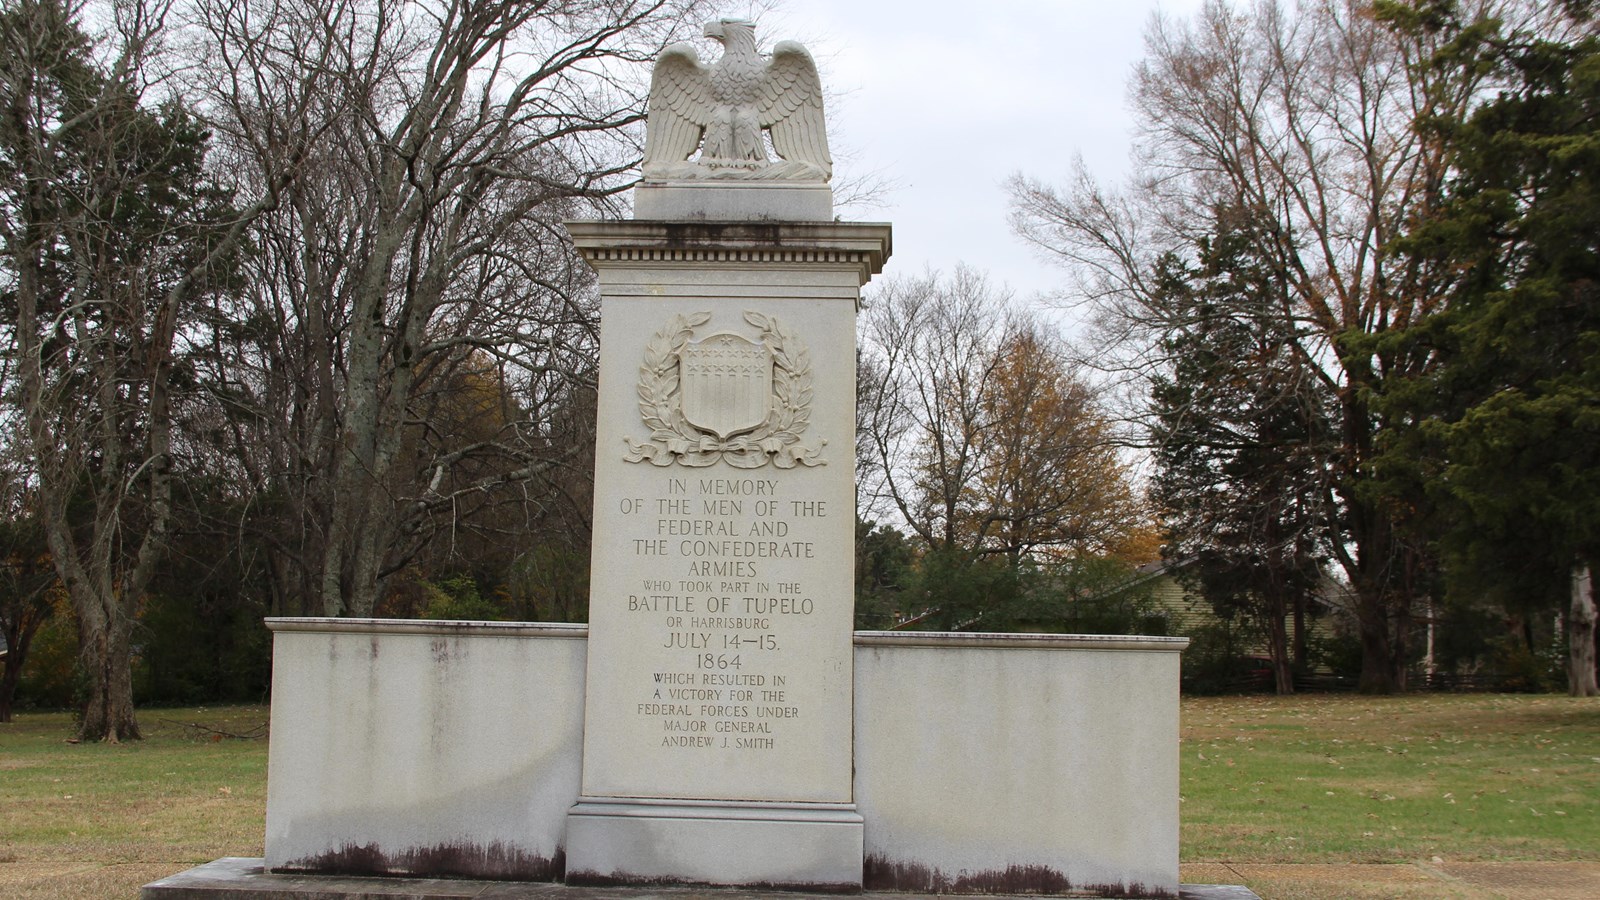 Granite monument with an eagle on the top commemorating the Battle of Tupelo